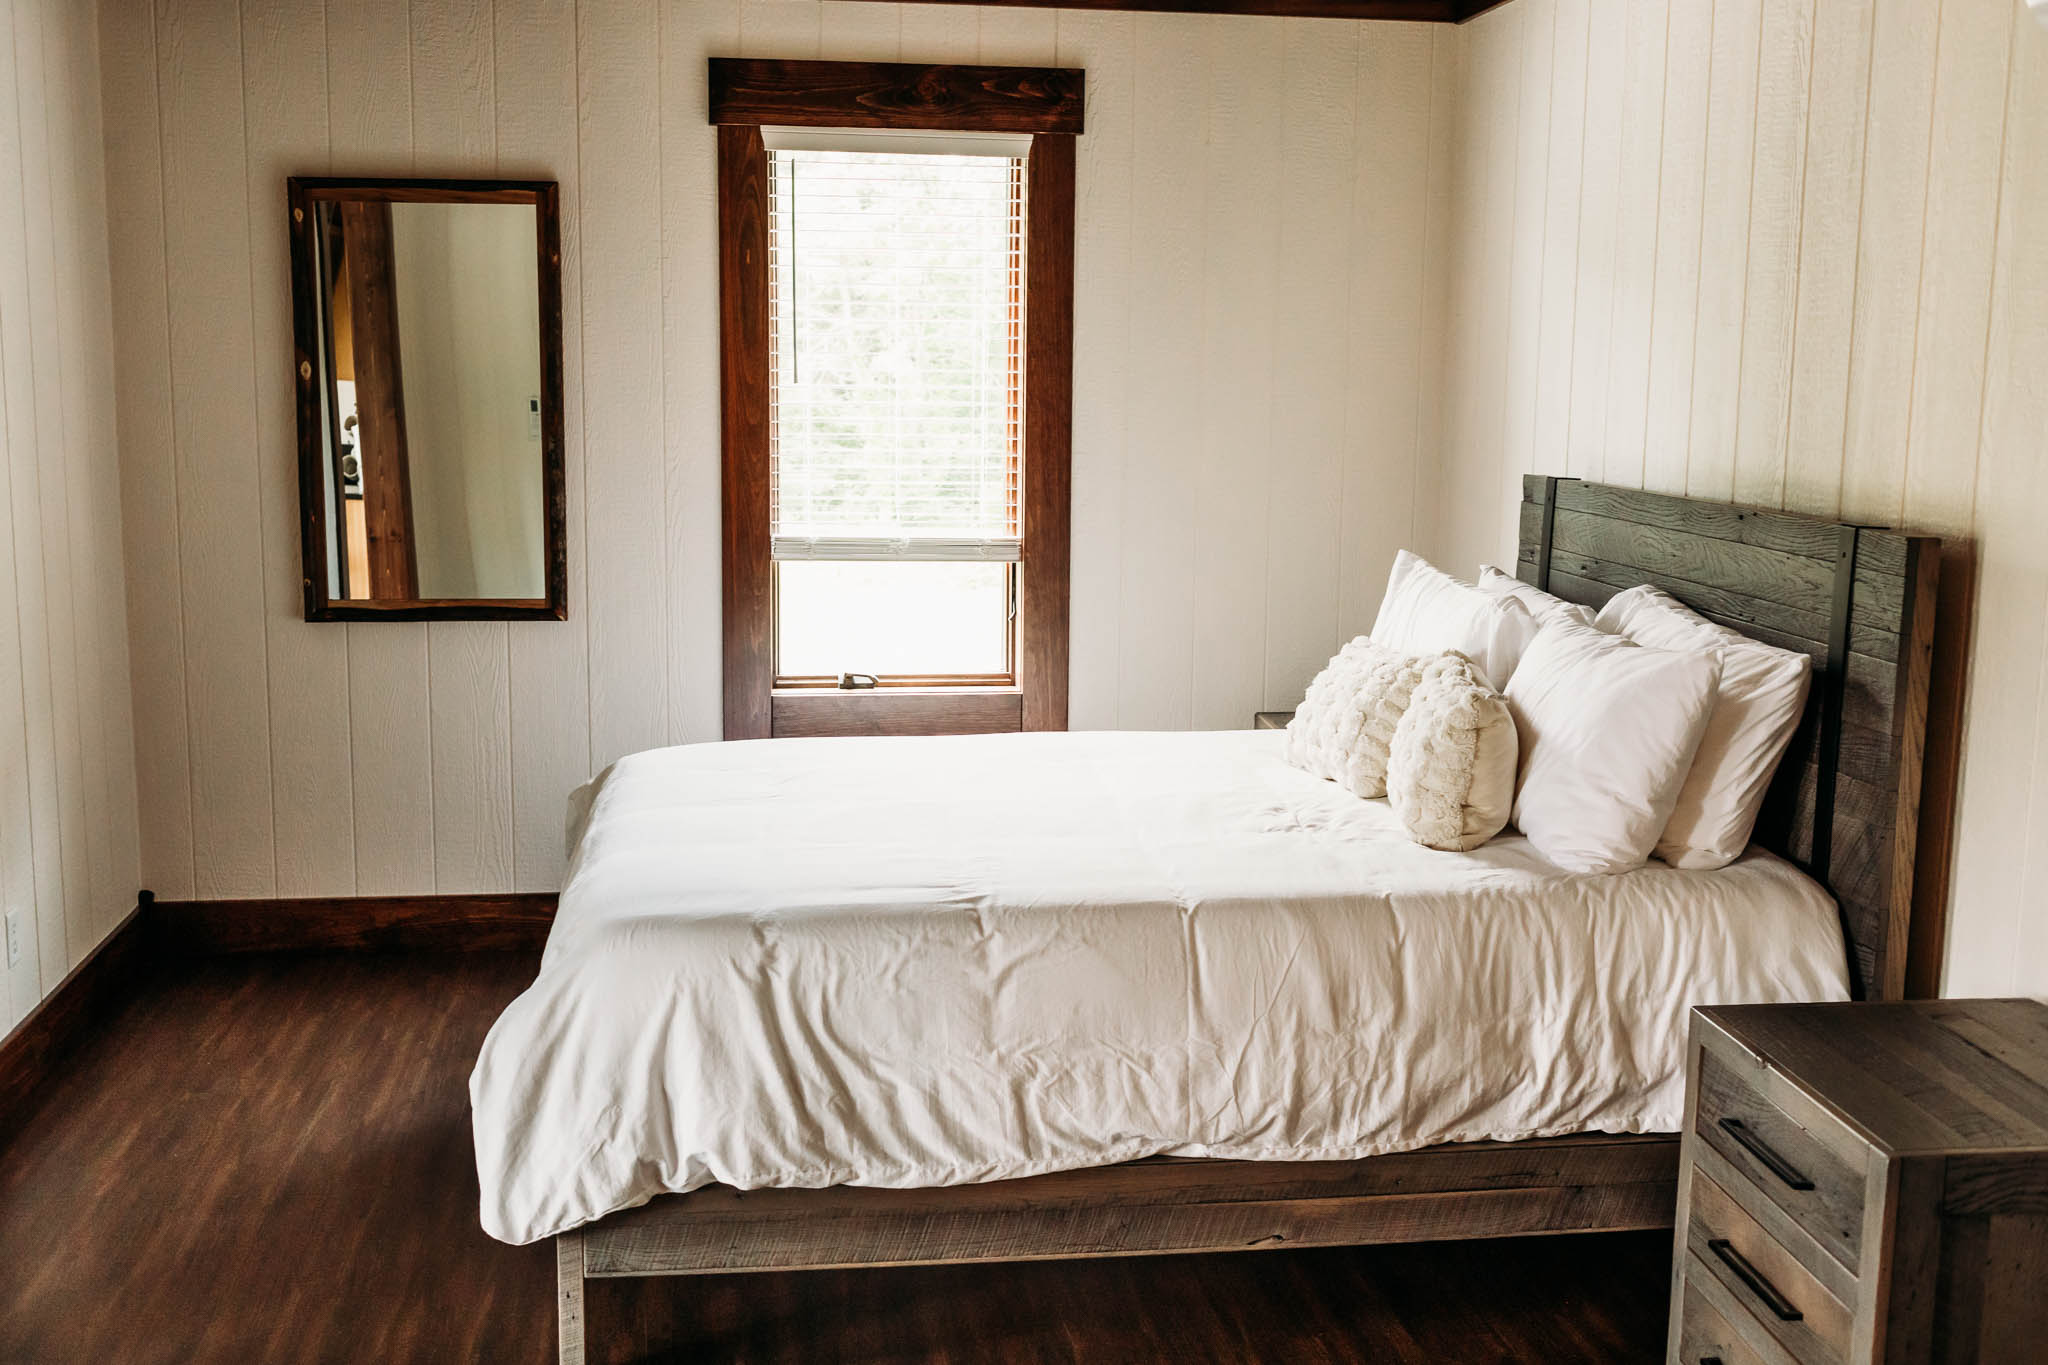 A view of the bedroom in the Villas at The VeNue. There is a wooden queen bed with white covers, wooden nightstand, large window and mirror hanging on the wall.